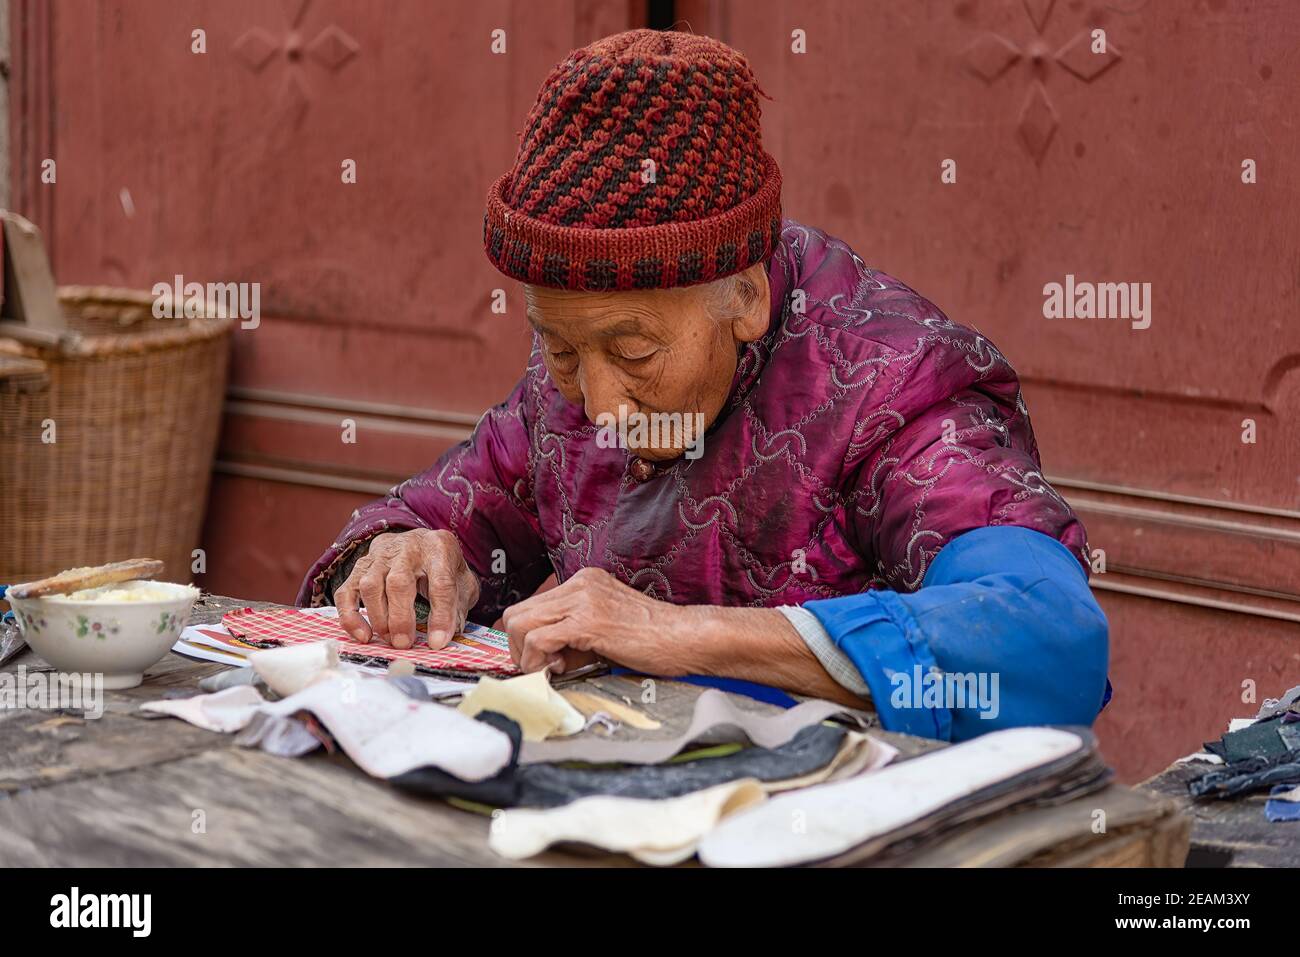 Xizhou, China - April 26, 2019: Portrait of an elderly woman at work at Xizhou old market. She's working on soles for the typical bai people shoes Stock Photo